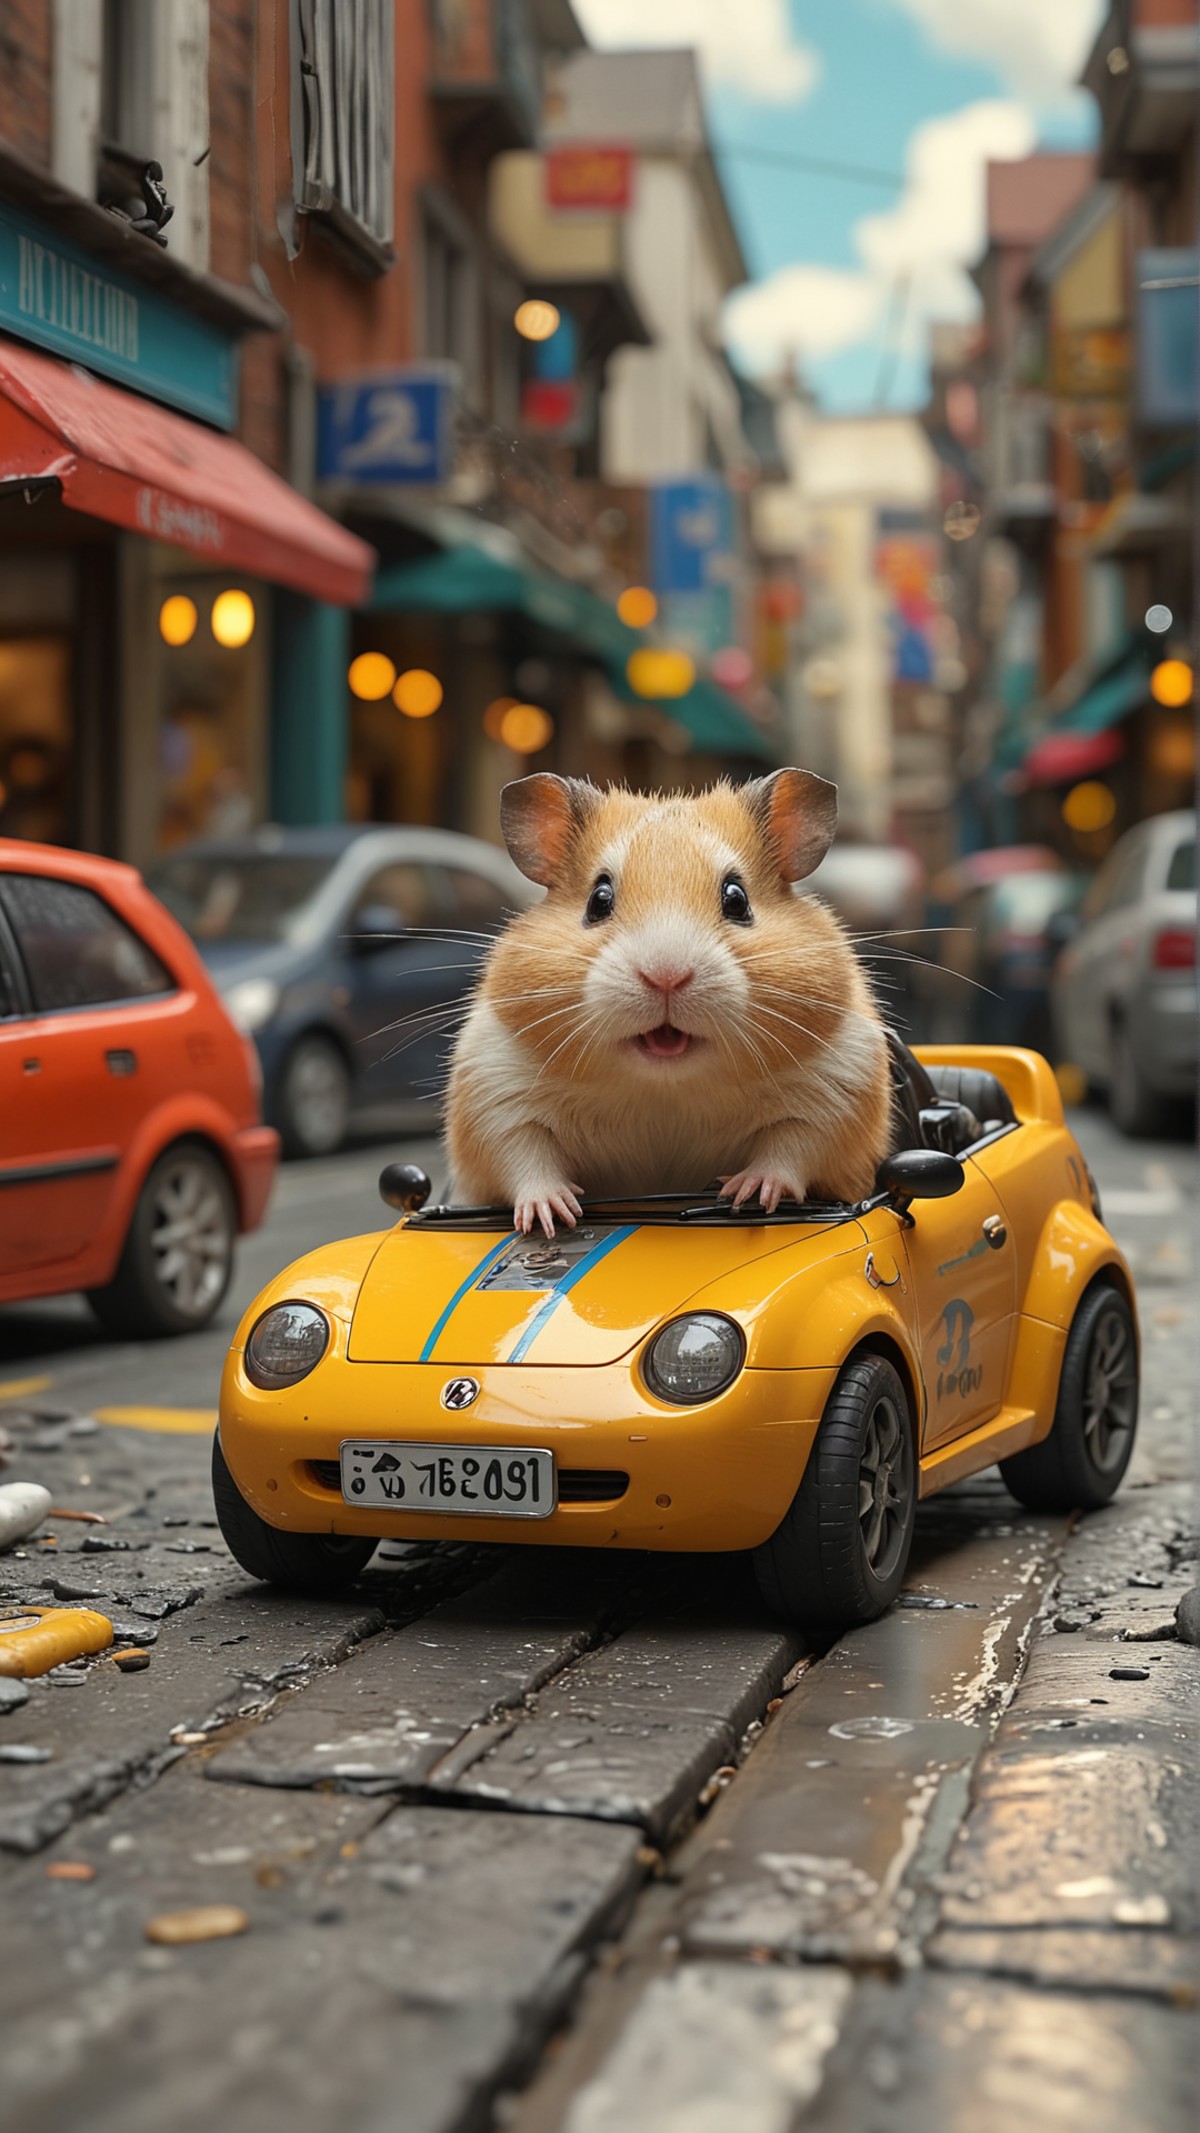 Giant hamster in a toy car, zooming through a busy street (masterpiece, award winning artwork)
many details, extreme detai...